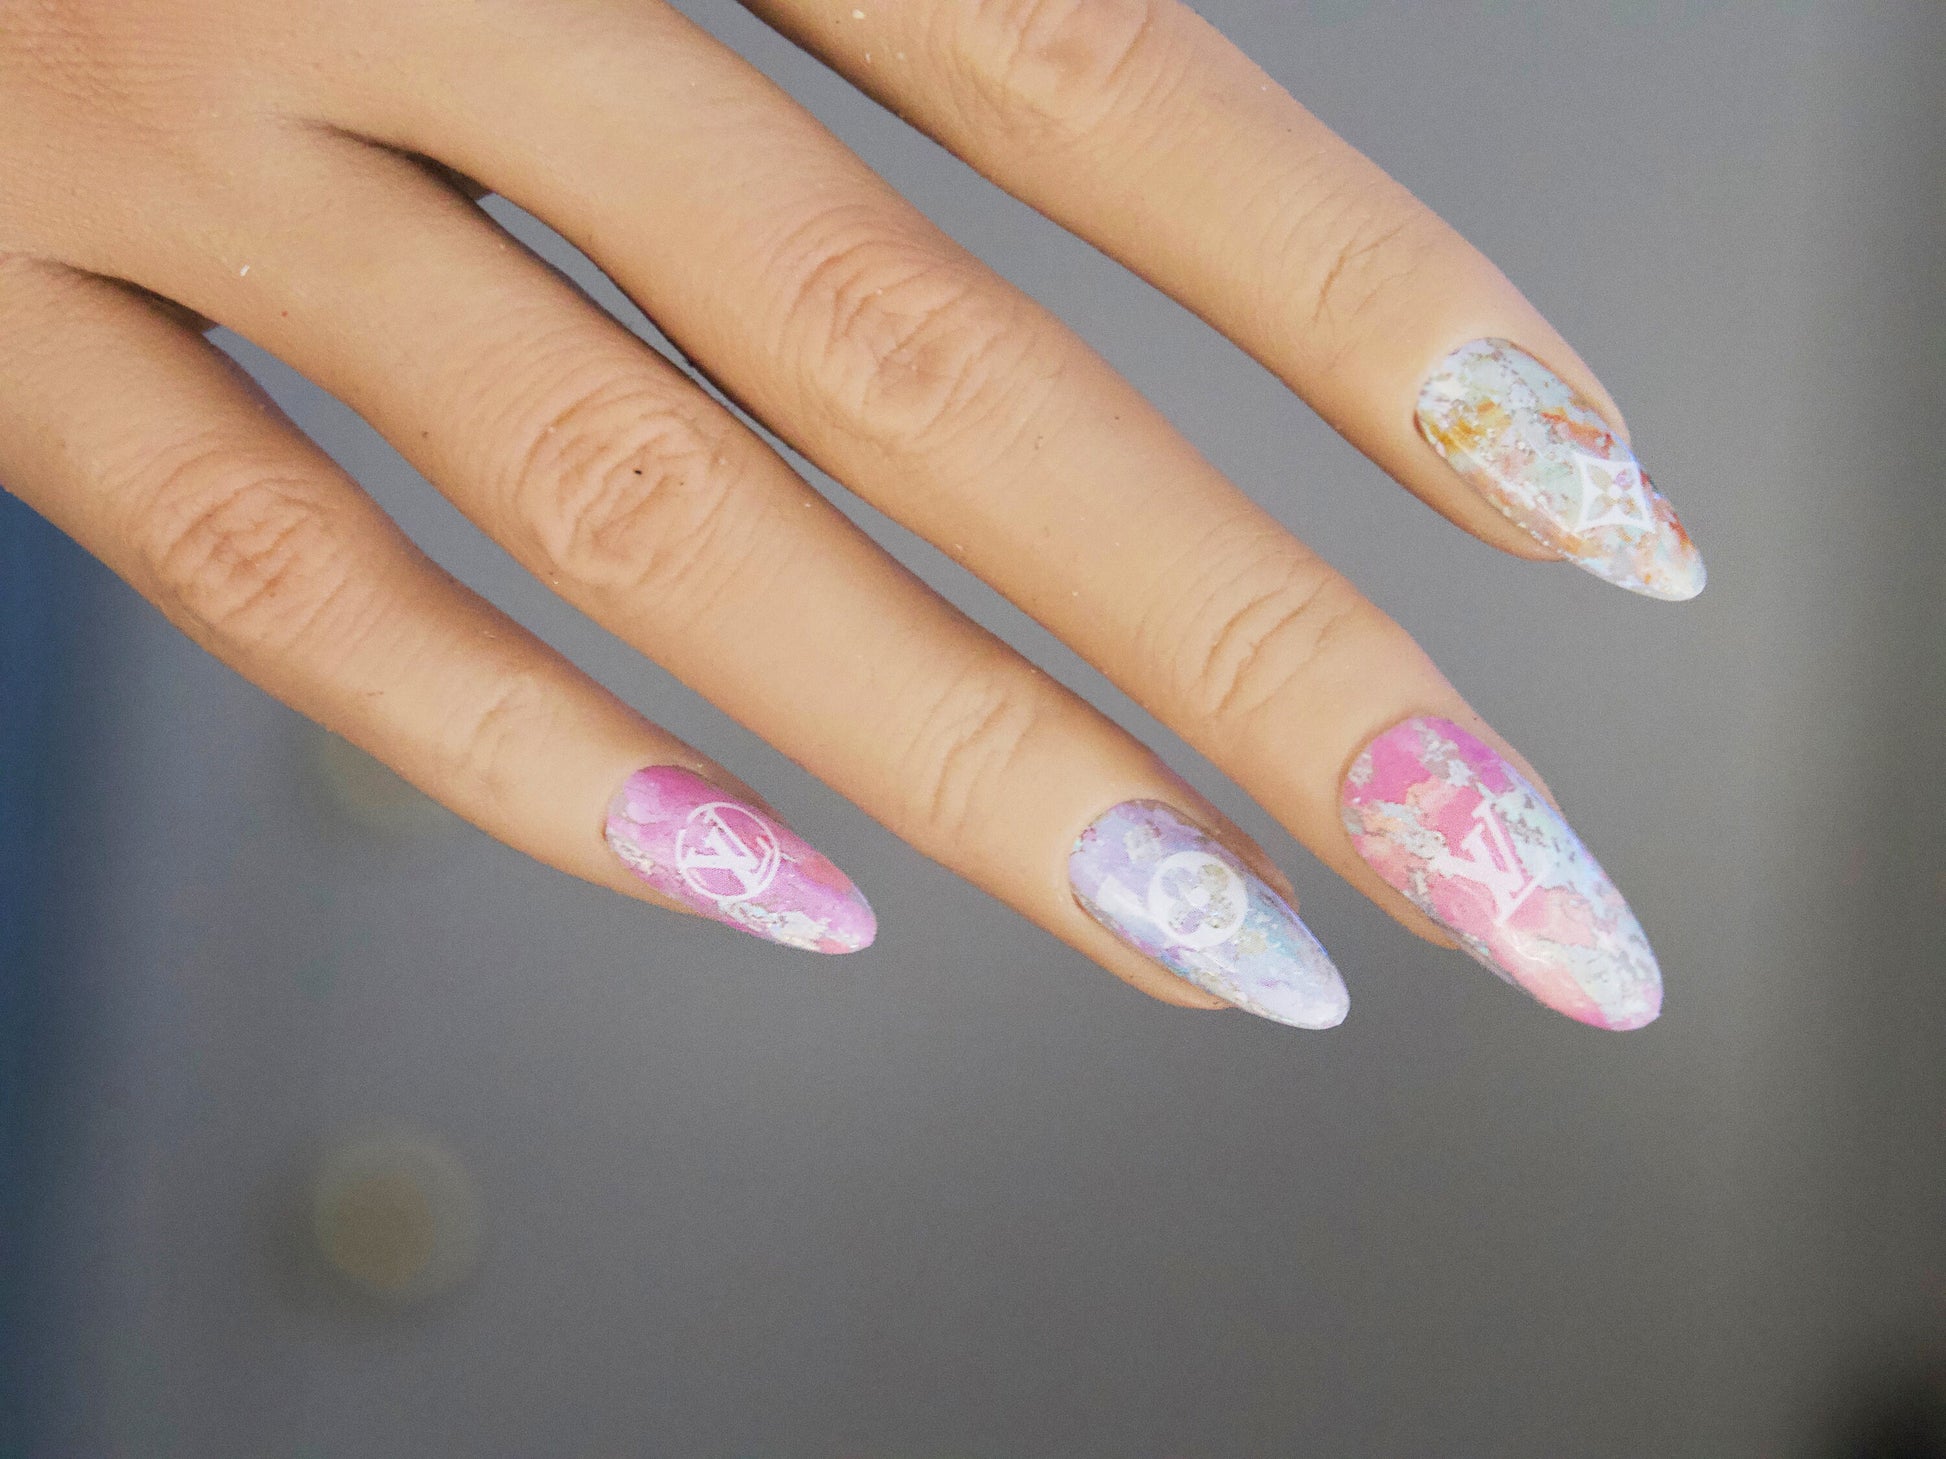 1.2 Y Pinky Marble Nail Foil/ Transfer paper Foil Nail Art Gradient Design Sticker Decal/ Nail Patterned DIY Milky Way theme nail design